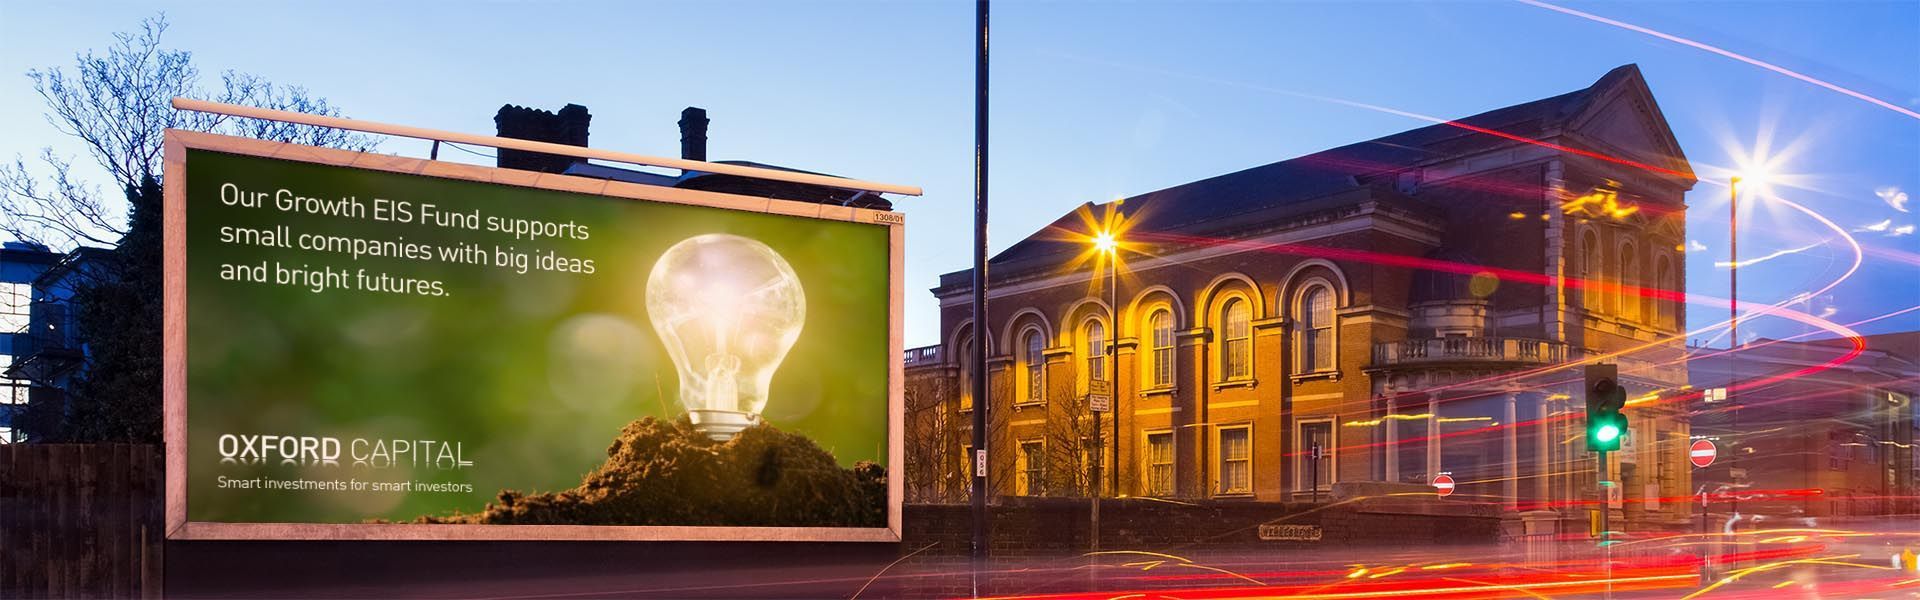 a billboard for oxford capital says our growth eis fund supports small companies with big ideas and bright futures